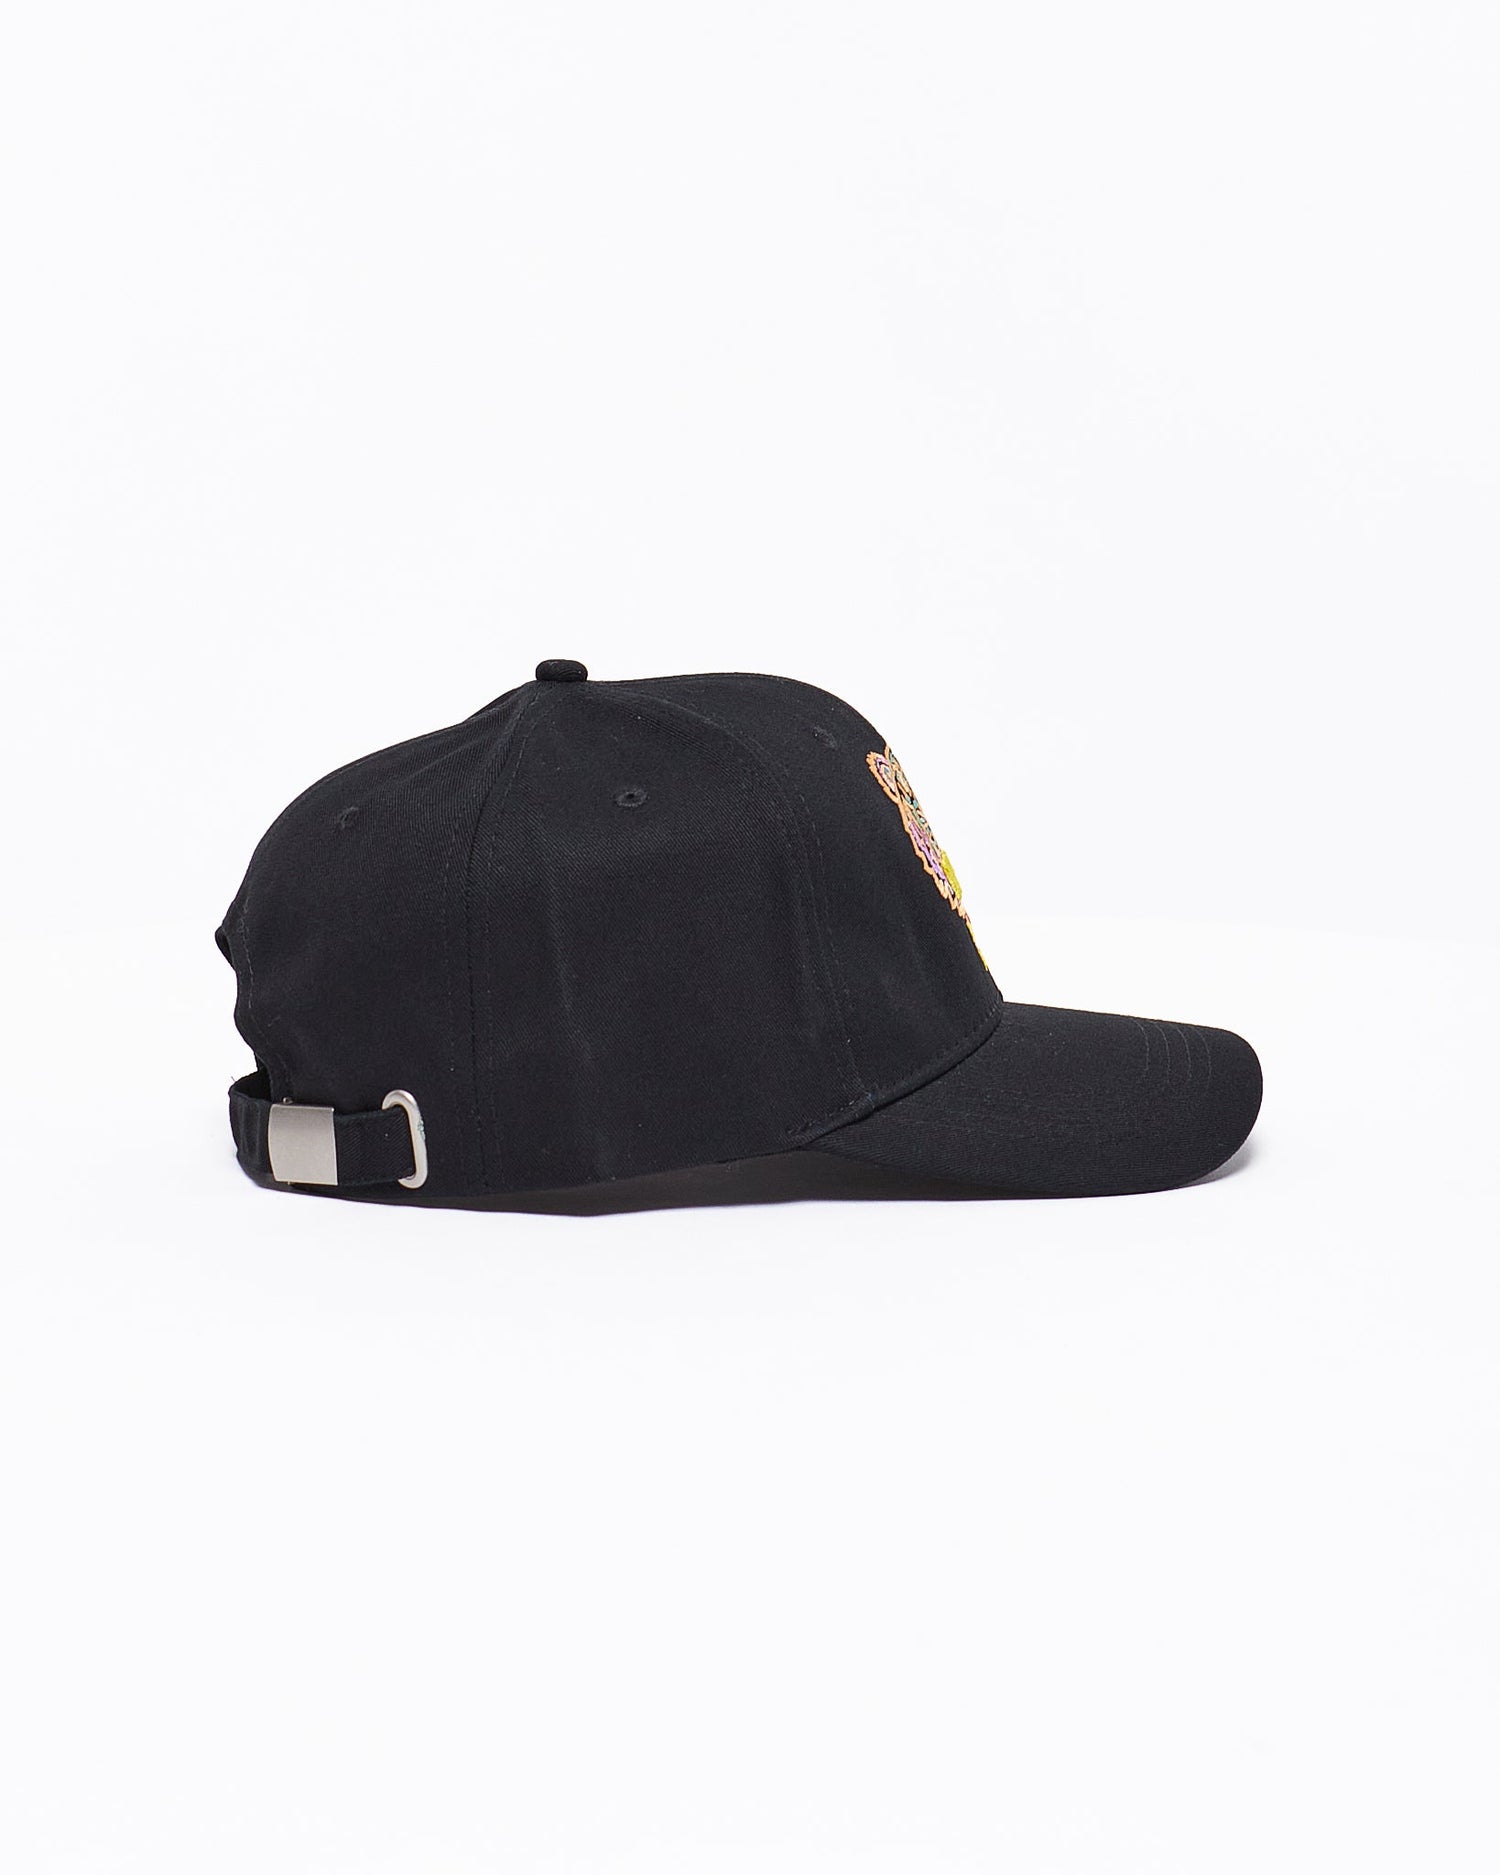 MOI OUTFIT-Tiger Head Embroidered Cap 13.90